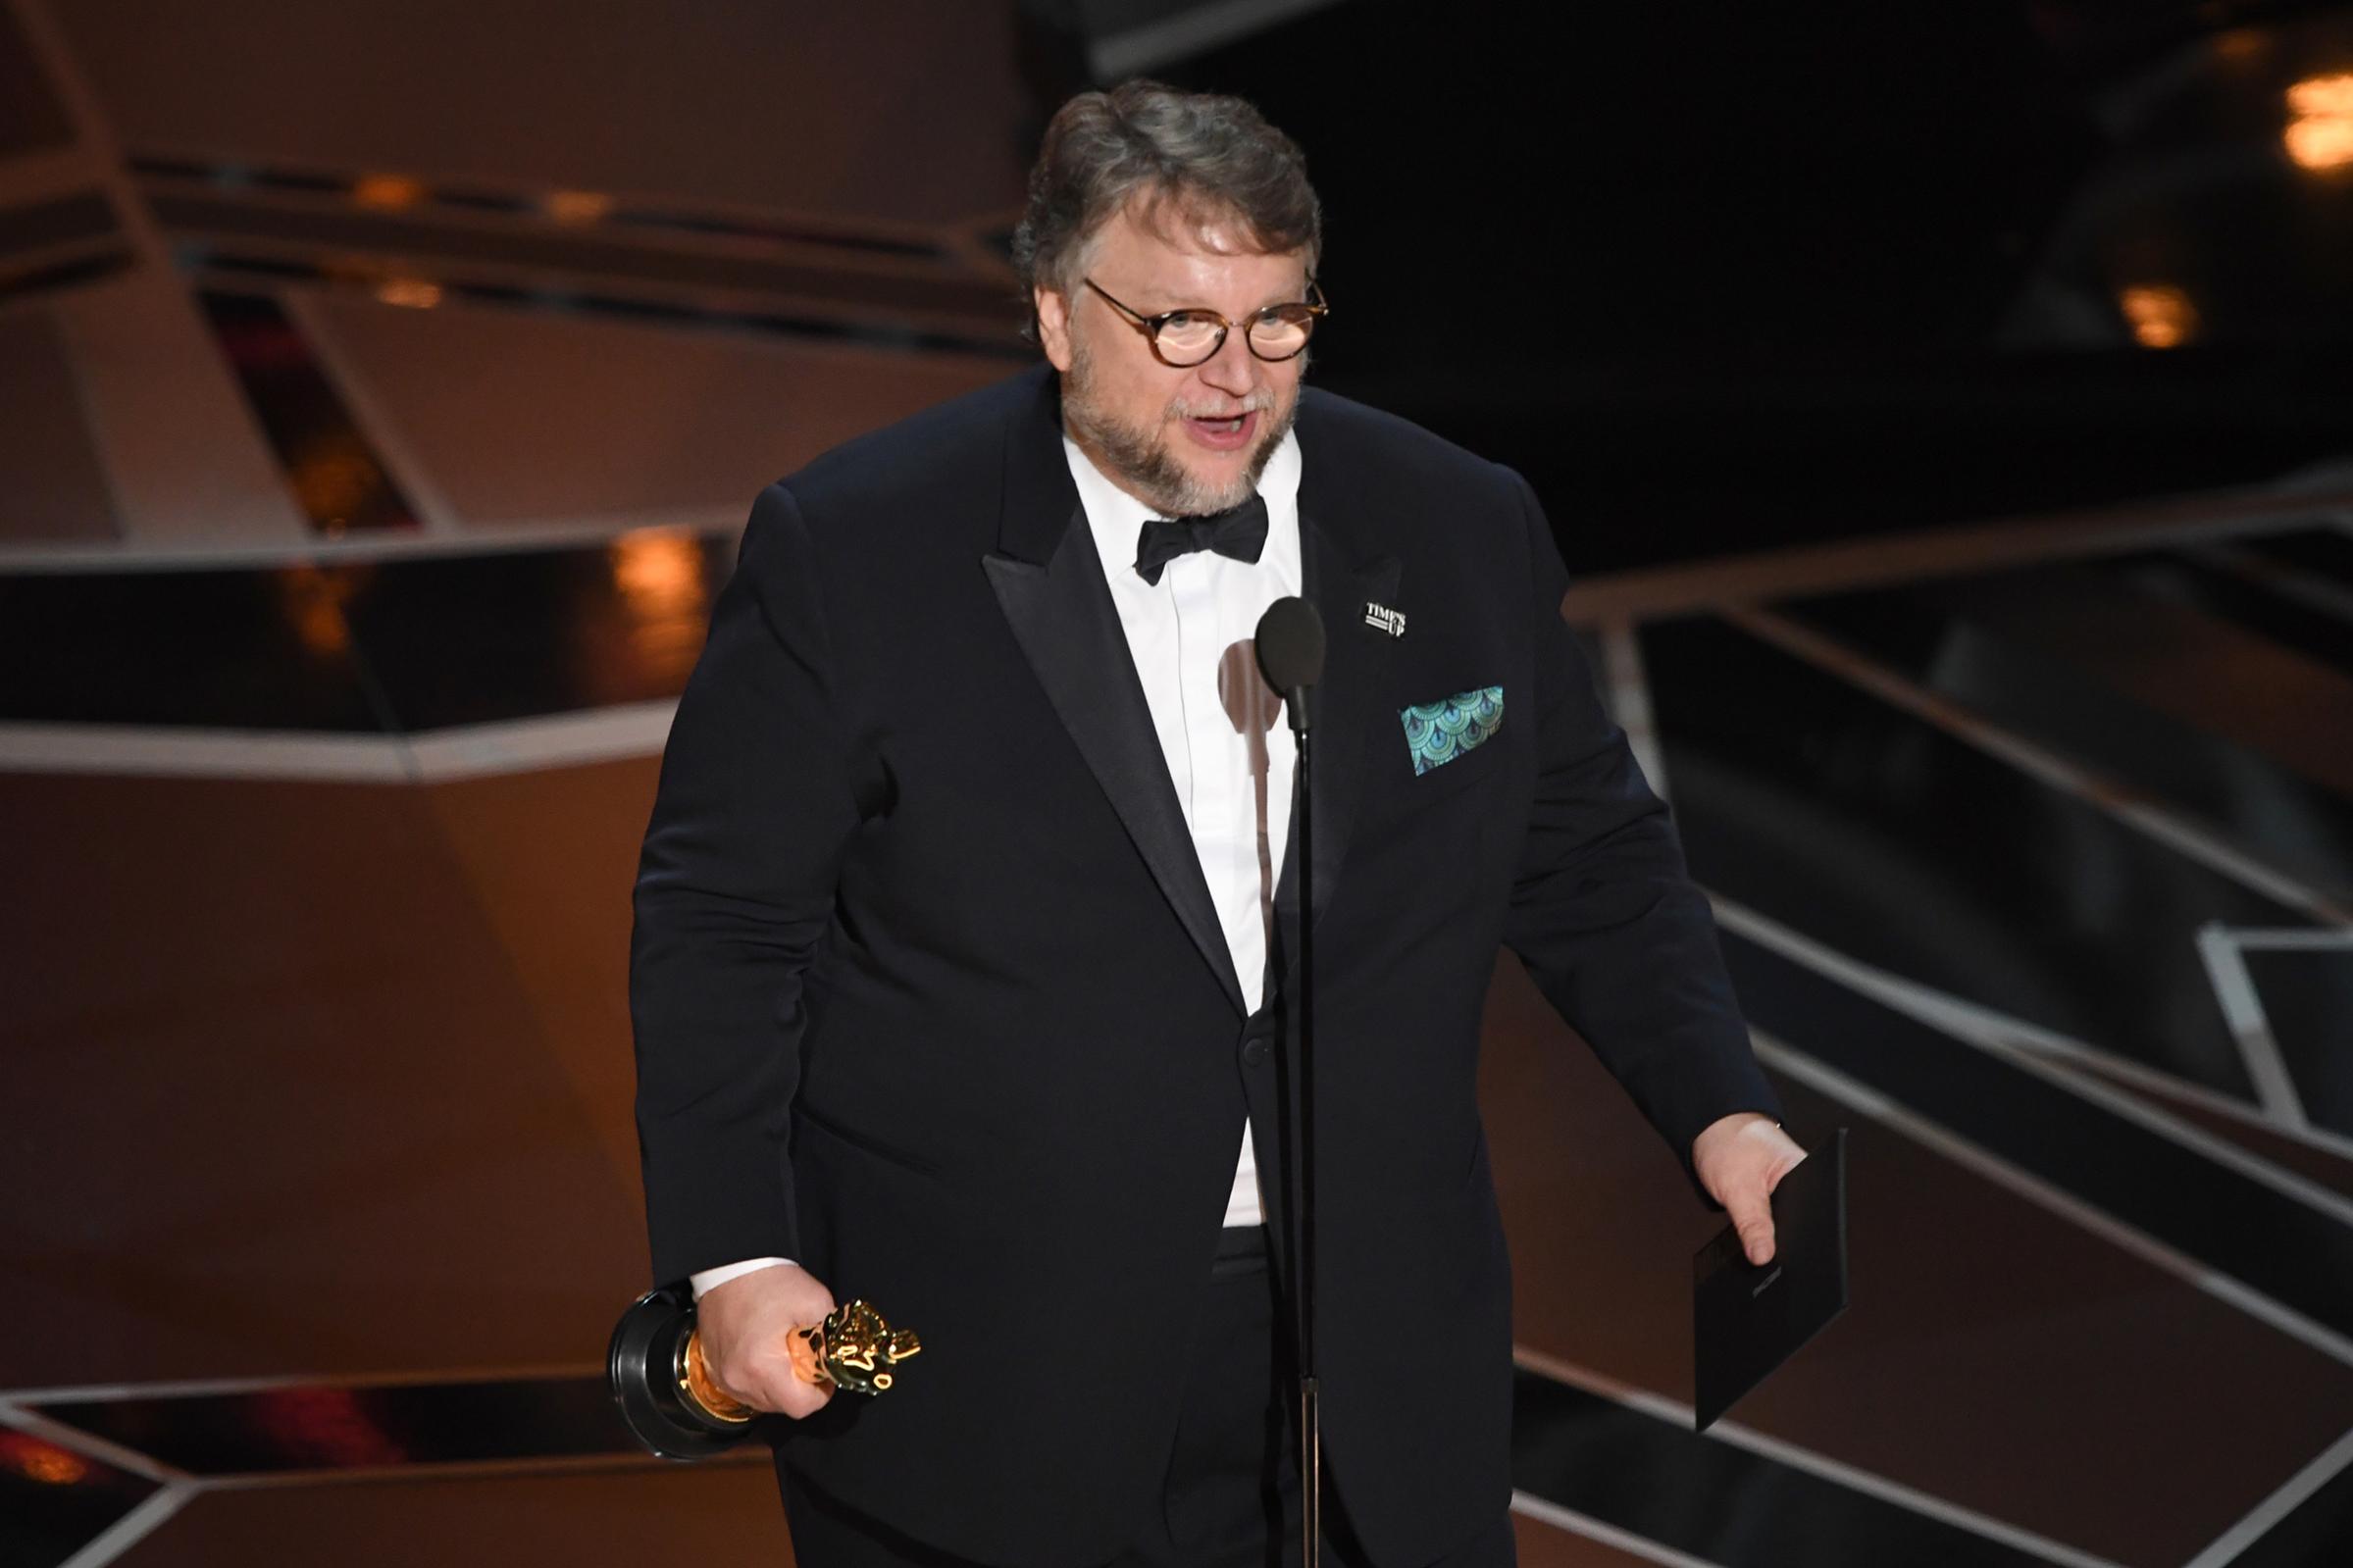 Director Guillermo del Toro delivers a speech after he won the Oscar for Best Director for "The Shape of Water" during the 90th Annual Academy Awards show on March 4, 2018 in Hollywood.